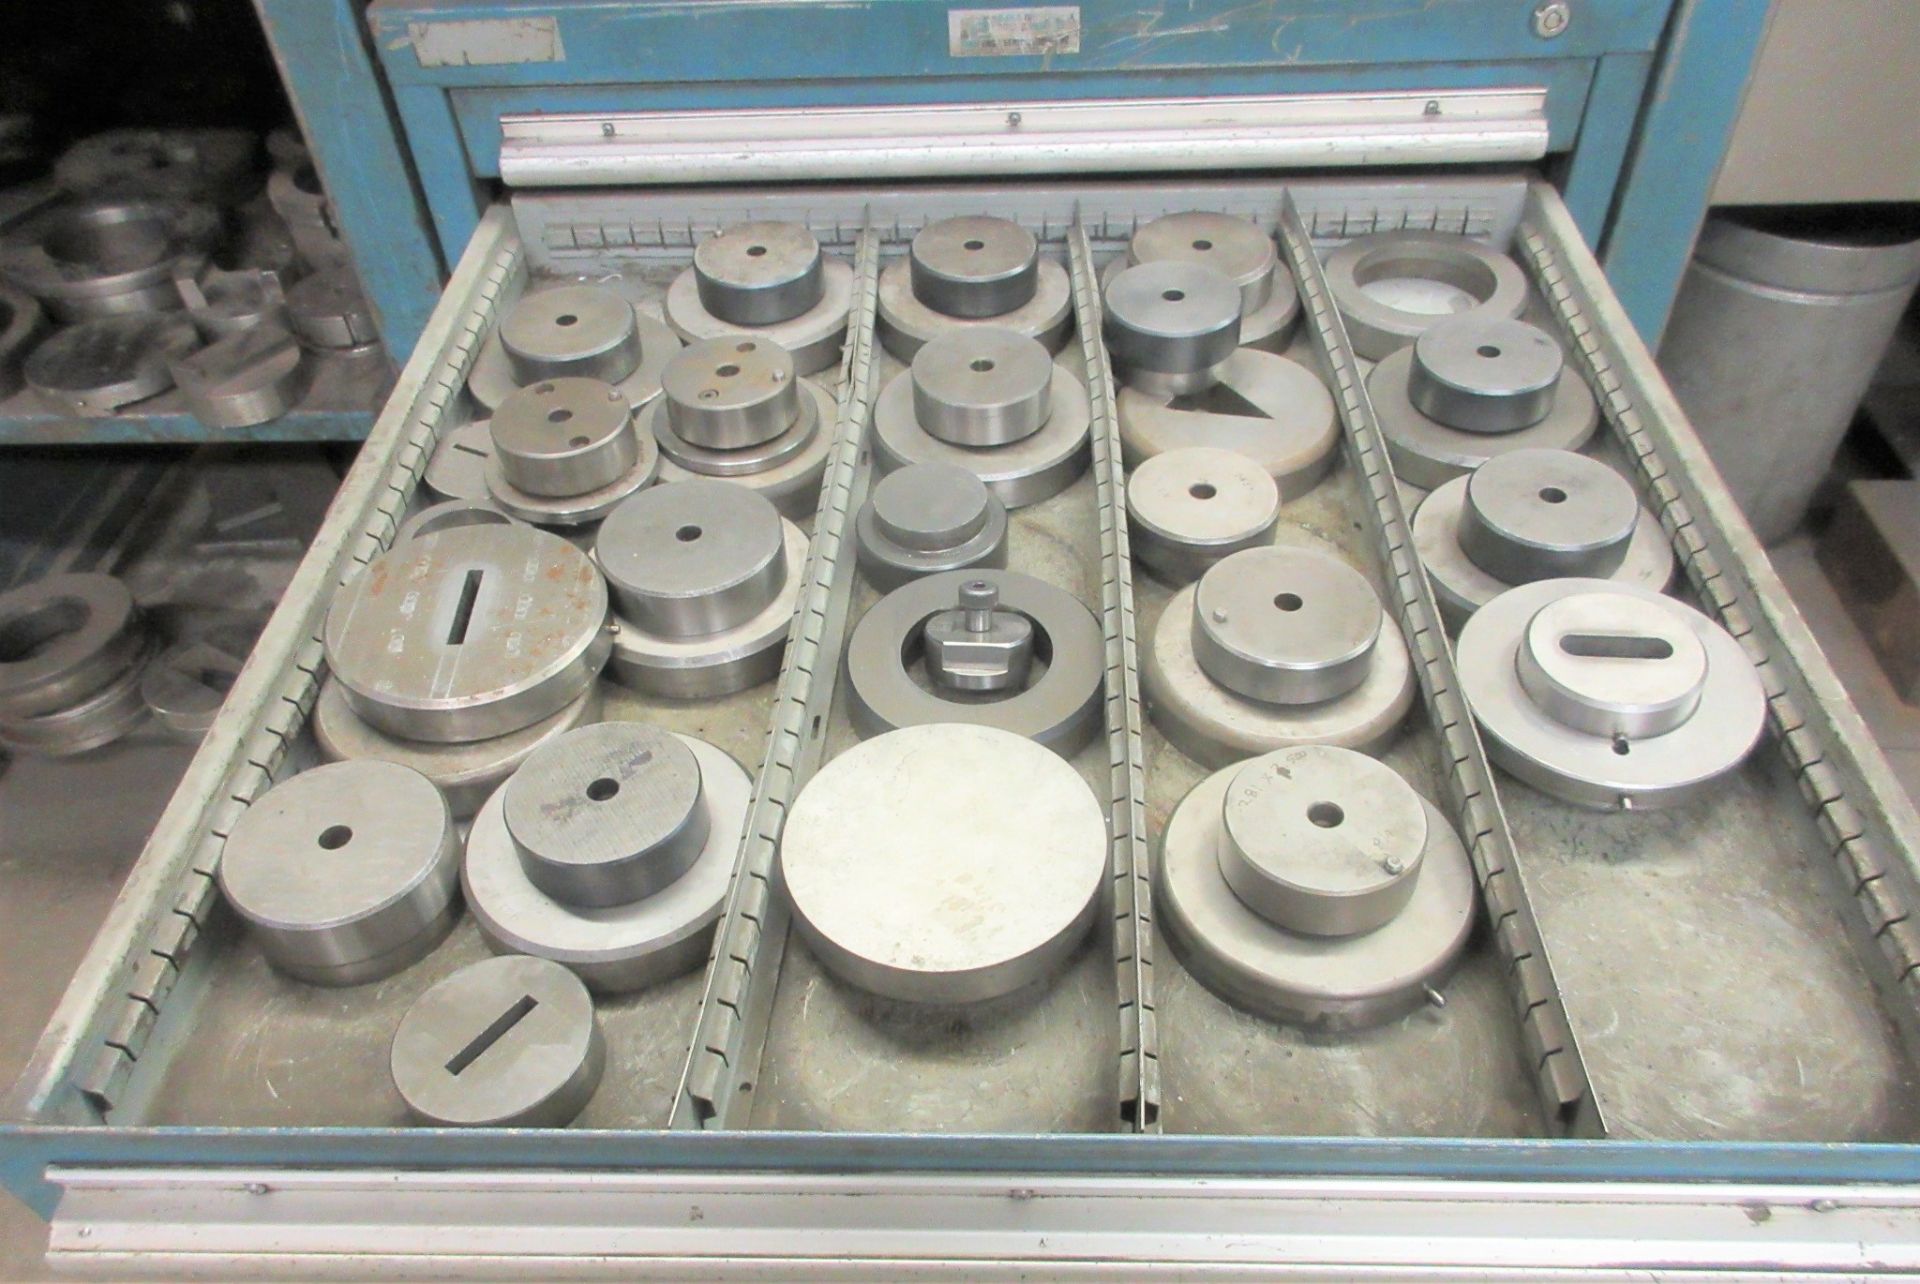 PIERCE-ALL 50-TON CAP. PERF-O-MATOR 3055 PUNCH, S/N 7812326 W/ LARGE ASSORTMENT OF PUNCH DIES - Image 30 of 40